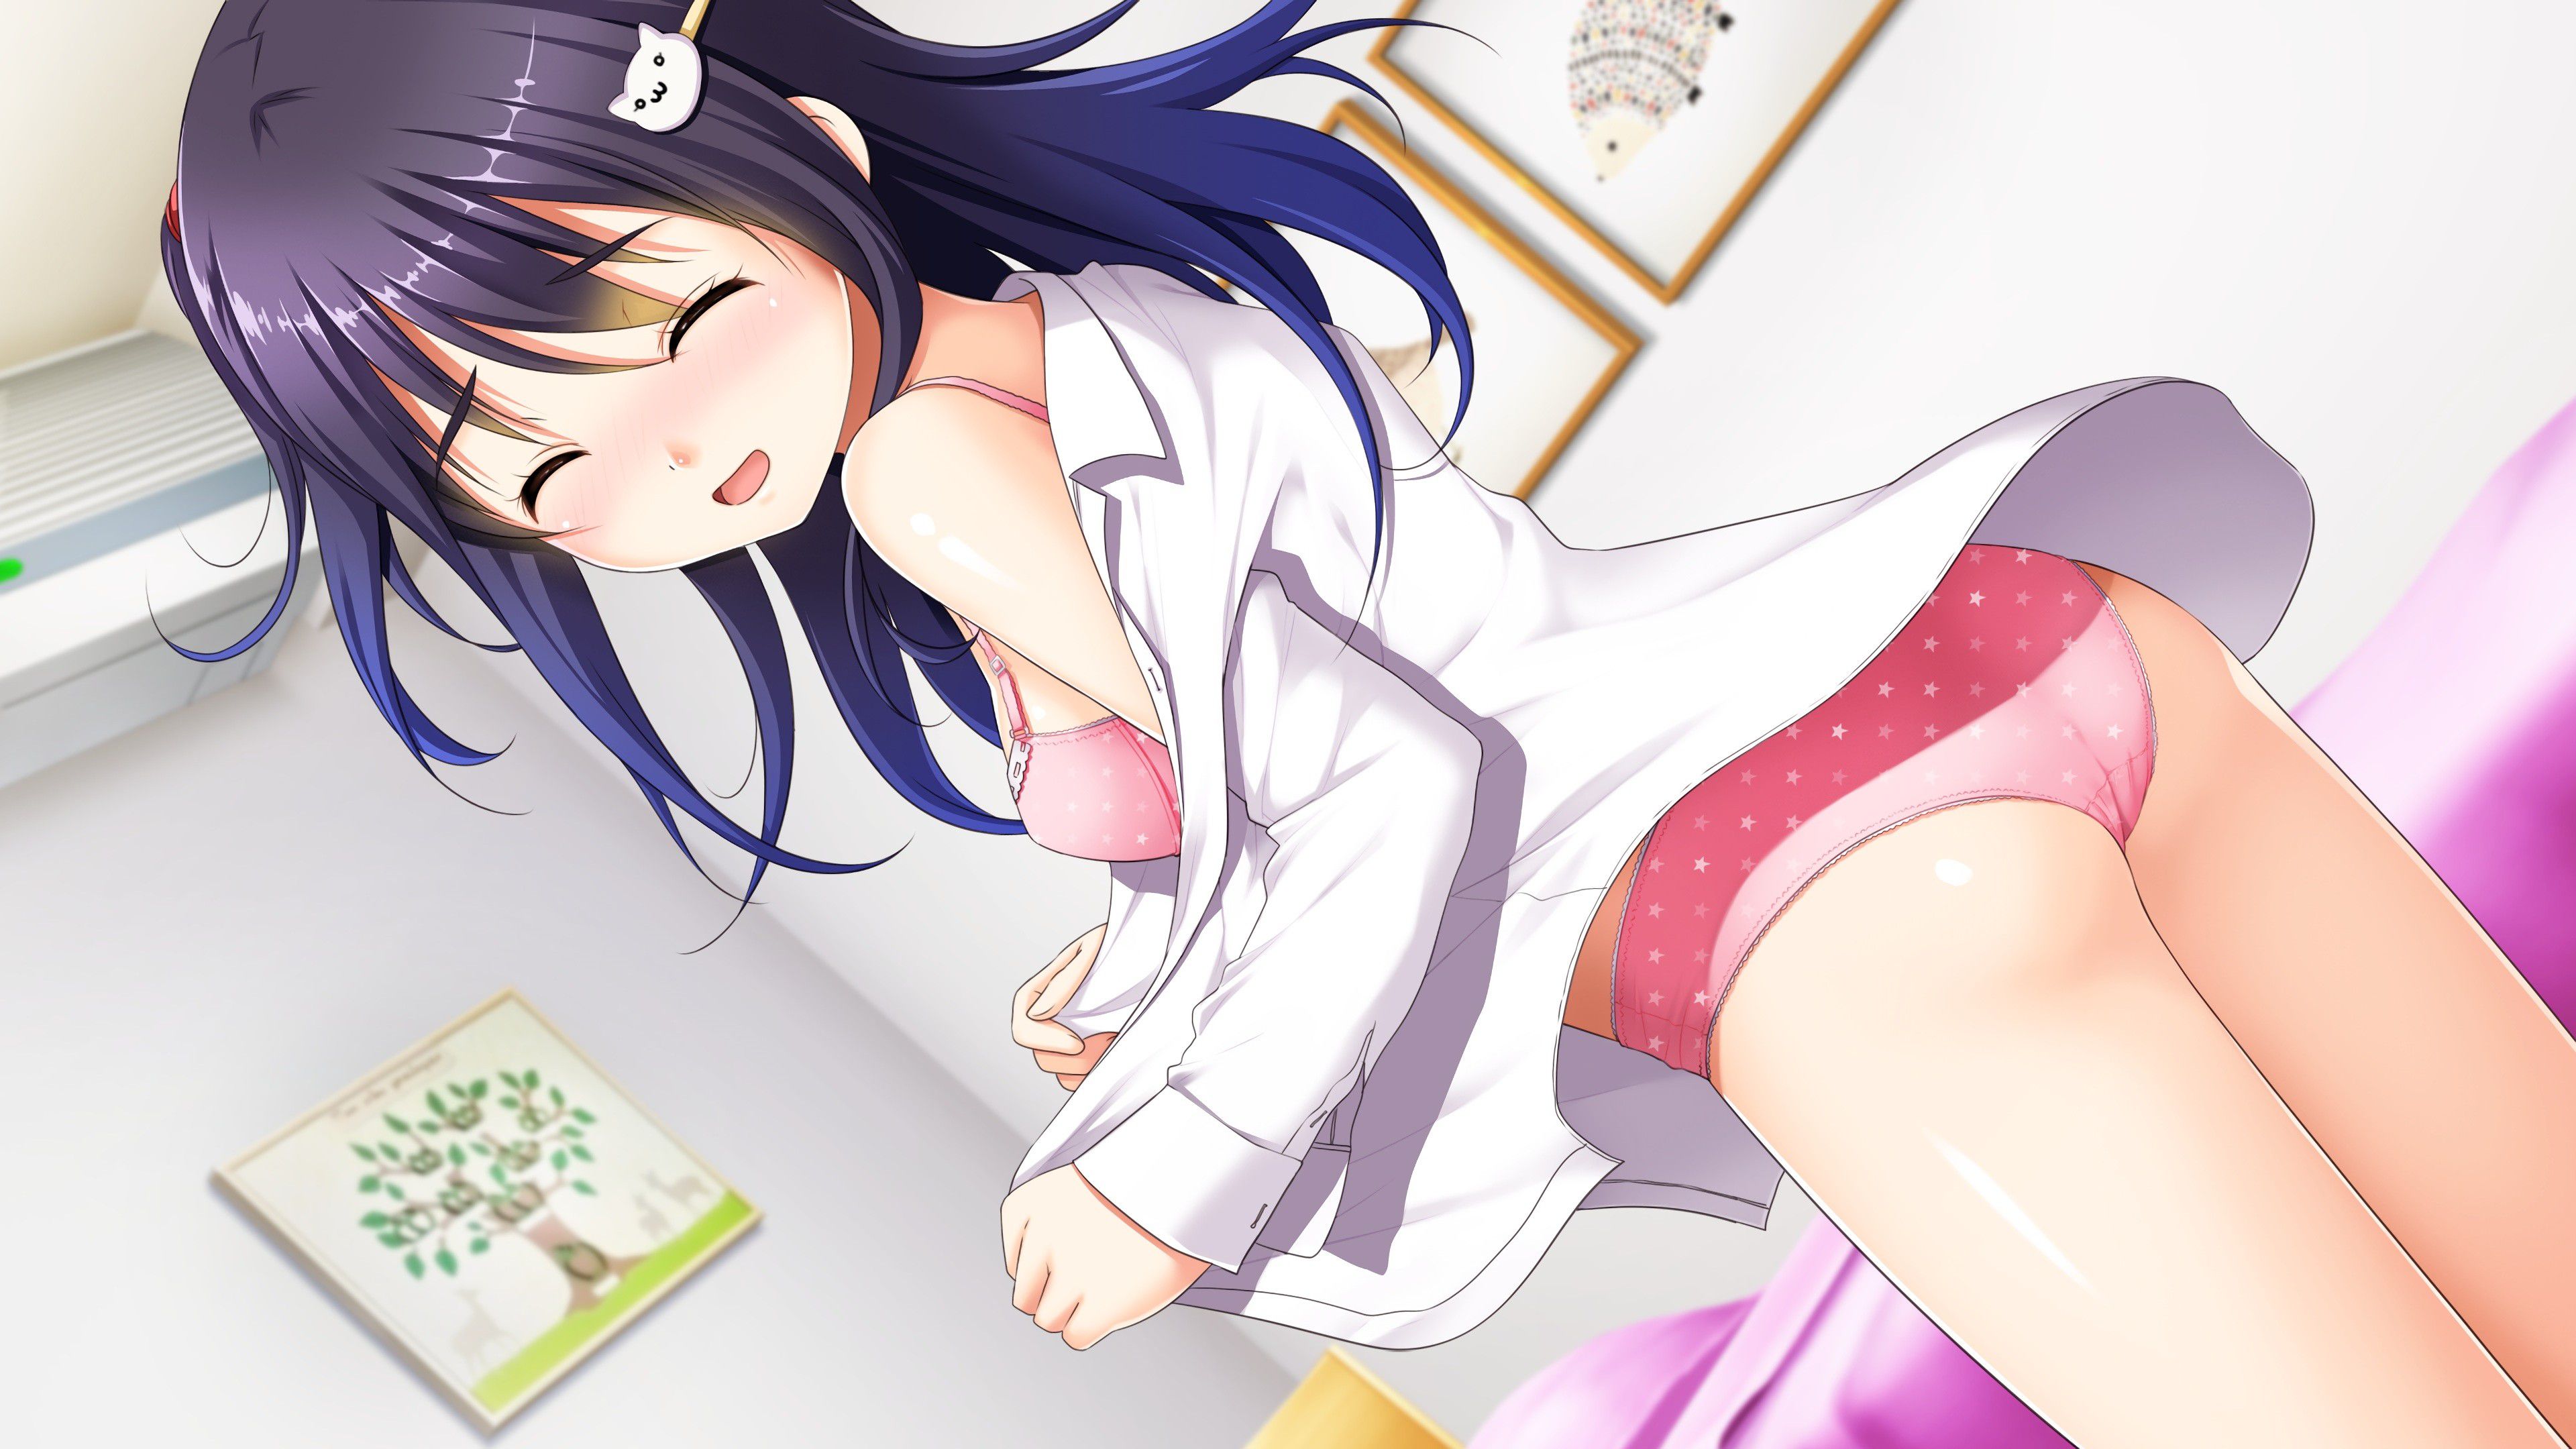 【Secondary erotic】 Here is an erotic image where the girl at the moment of changing clothes can be seen 9